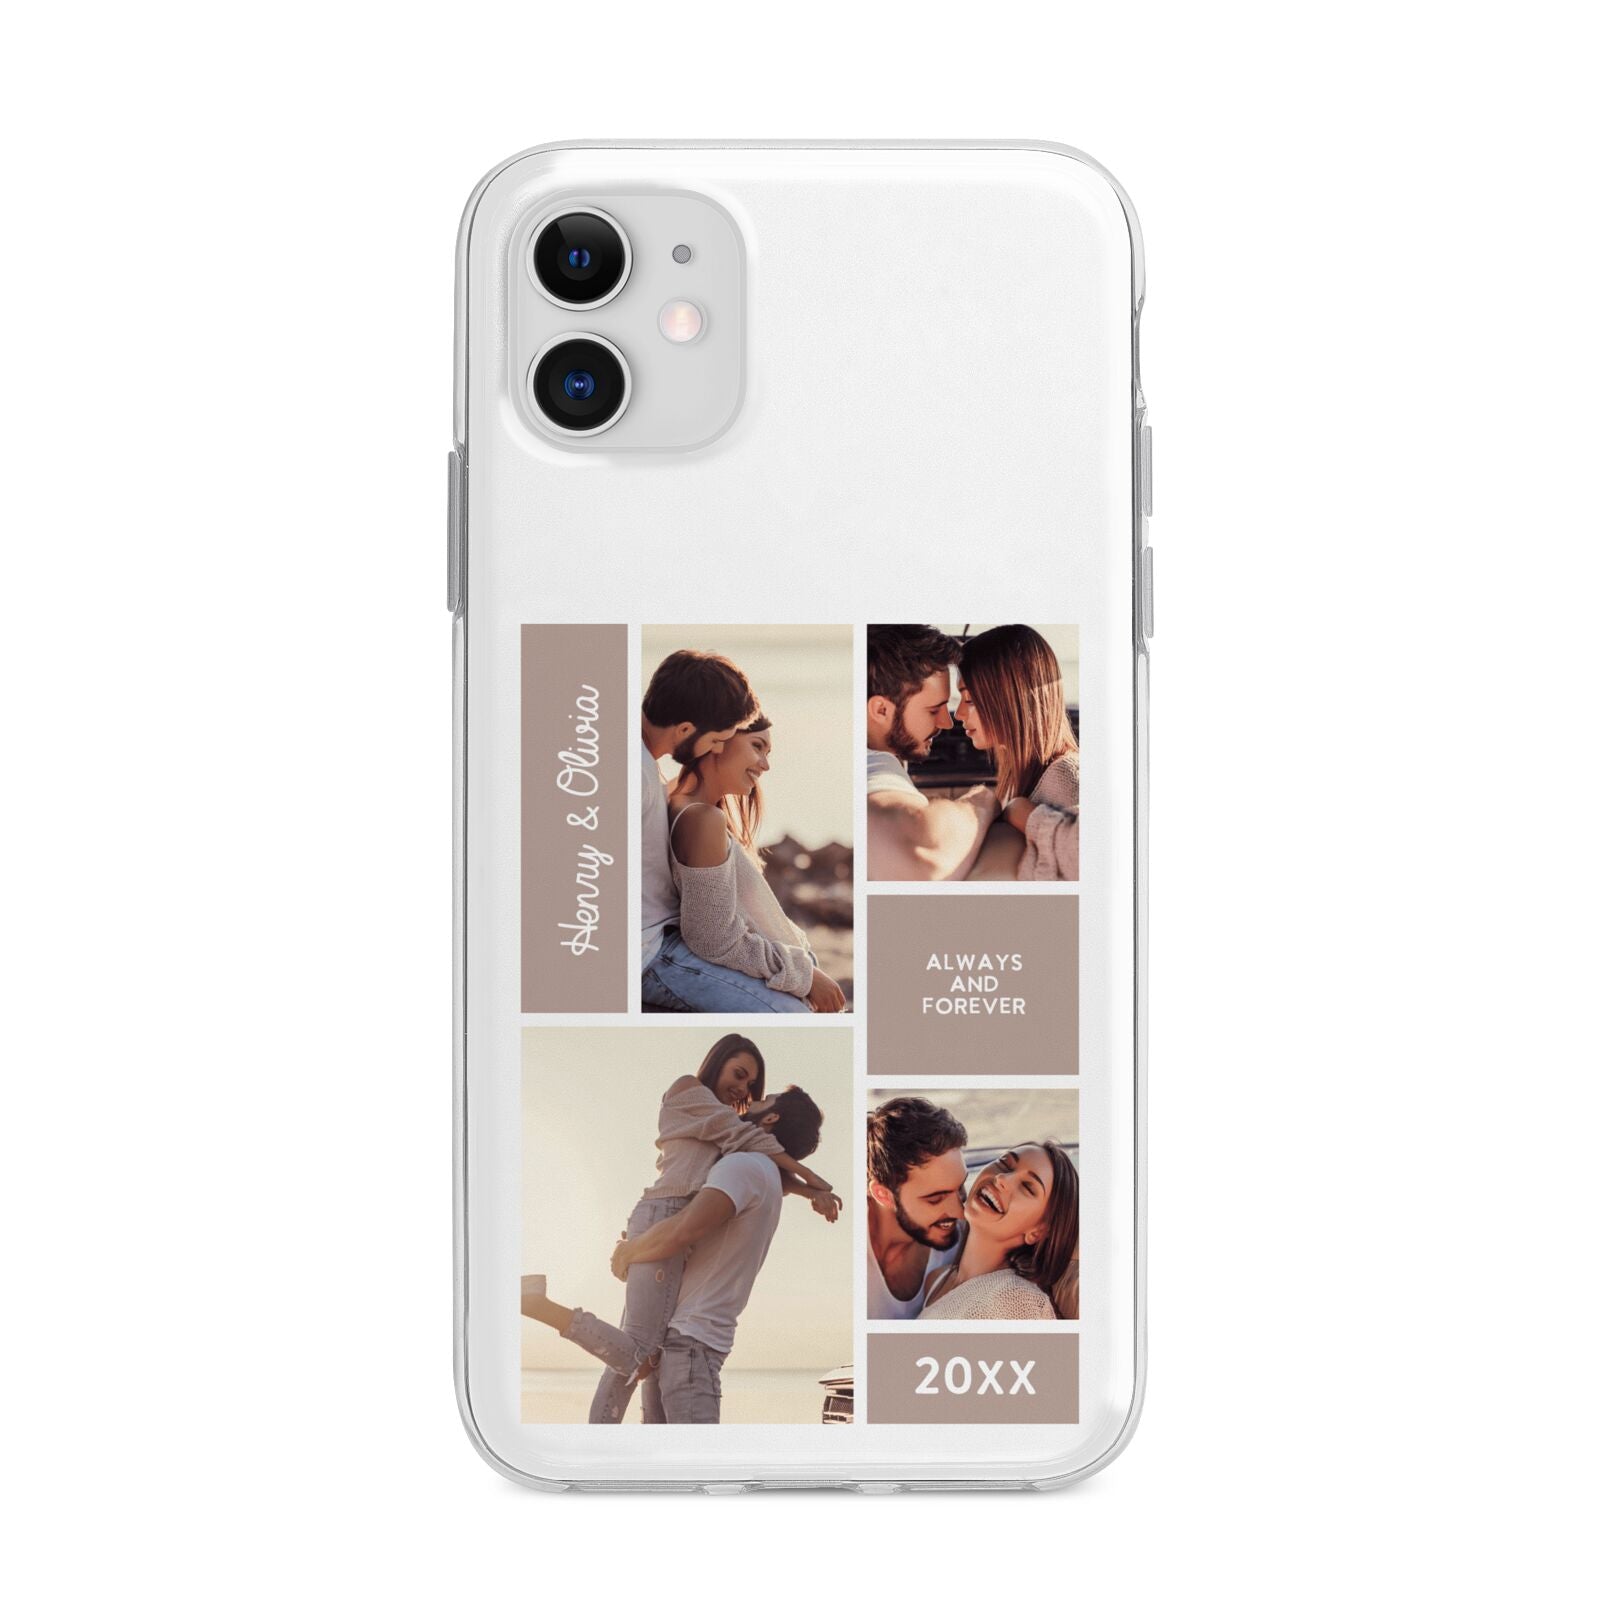 Couples Valentine Photo Collage Personalised Apple iPhone 11 in White with Bumper Case